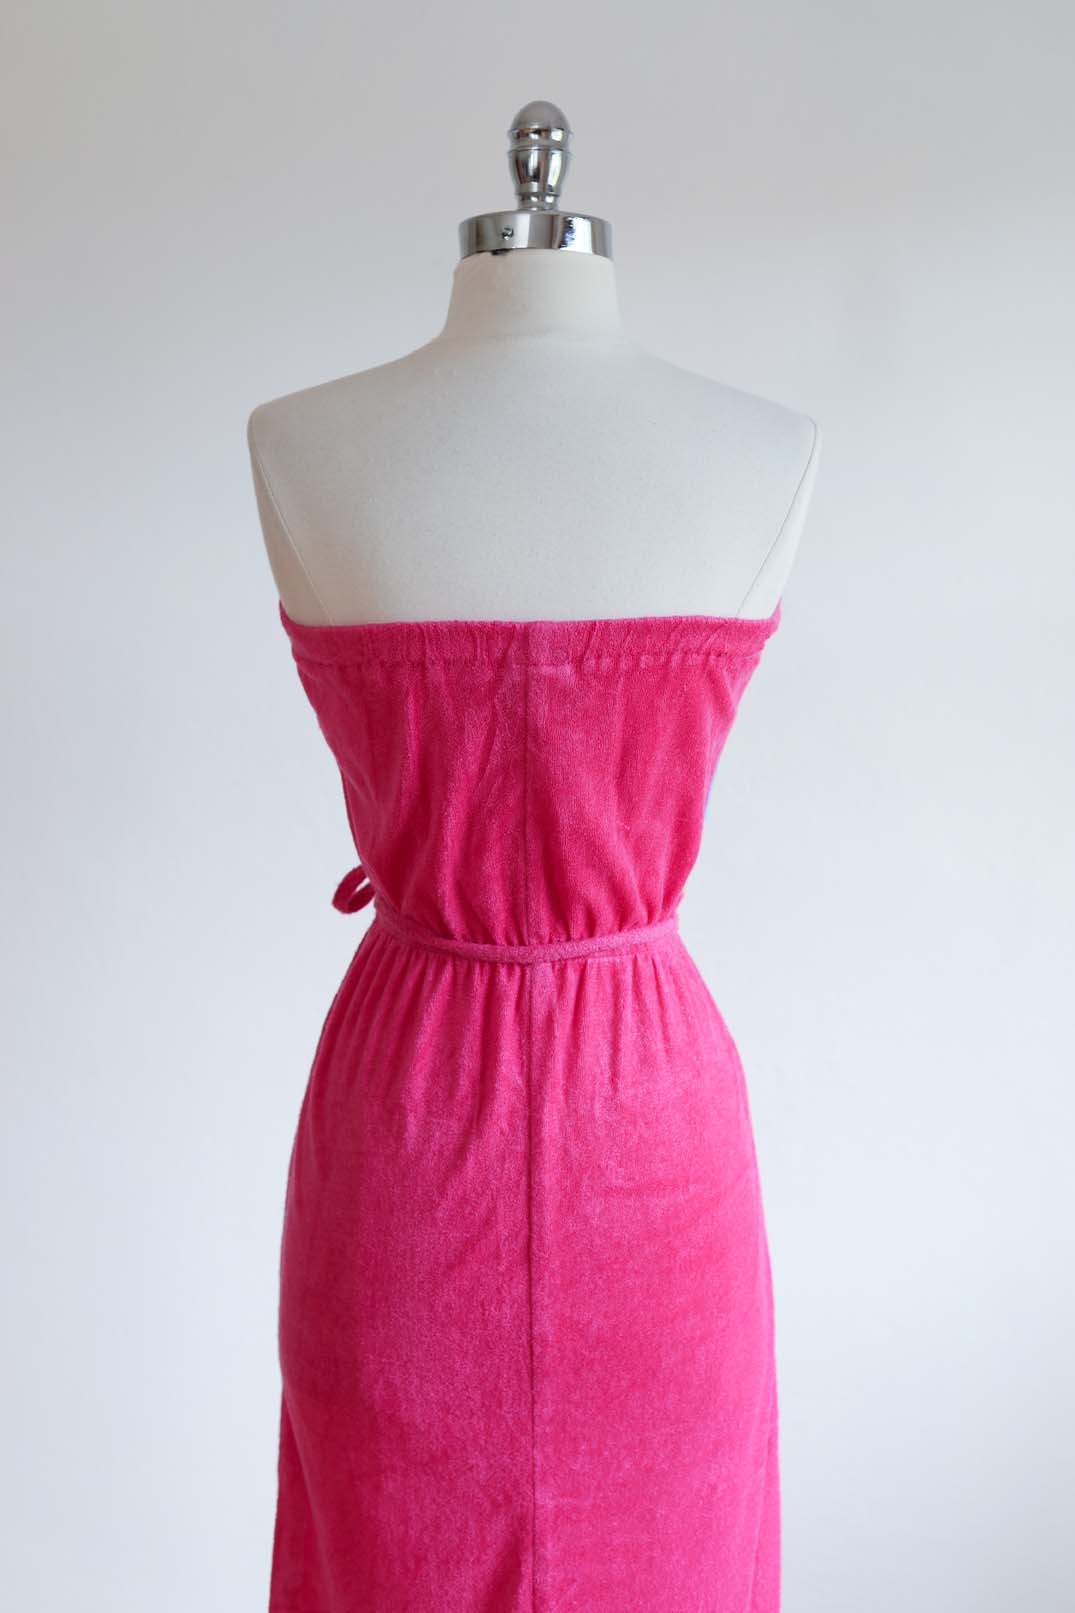 Vintage 1970s Dress - BARBIECORE Hot Pink Blue Yellow Color Block Terrycloth Tube Top Sundress Size XS S M